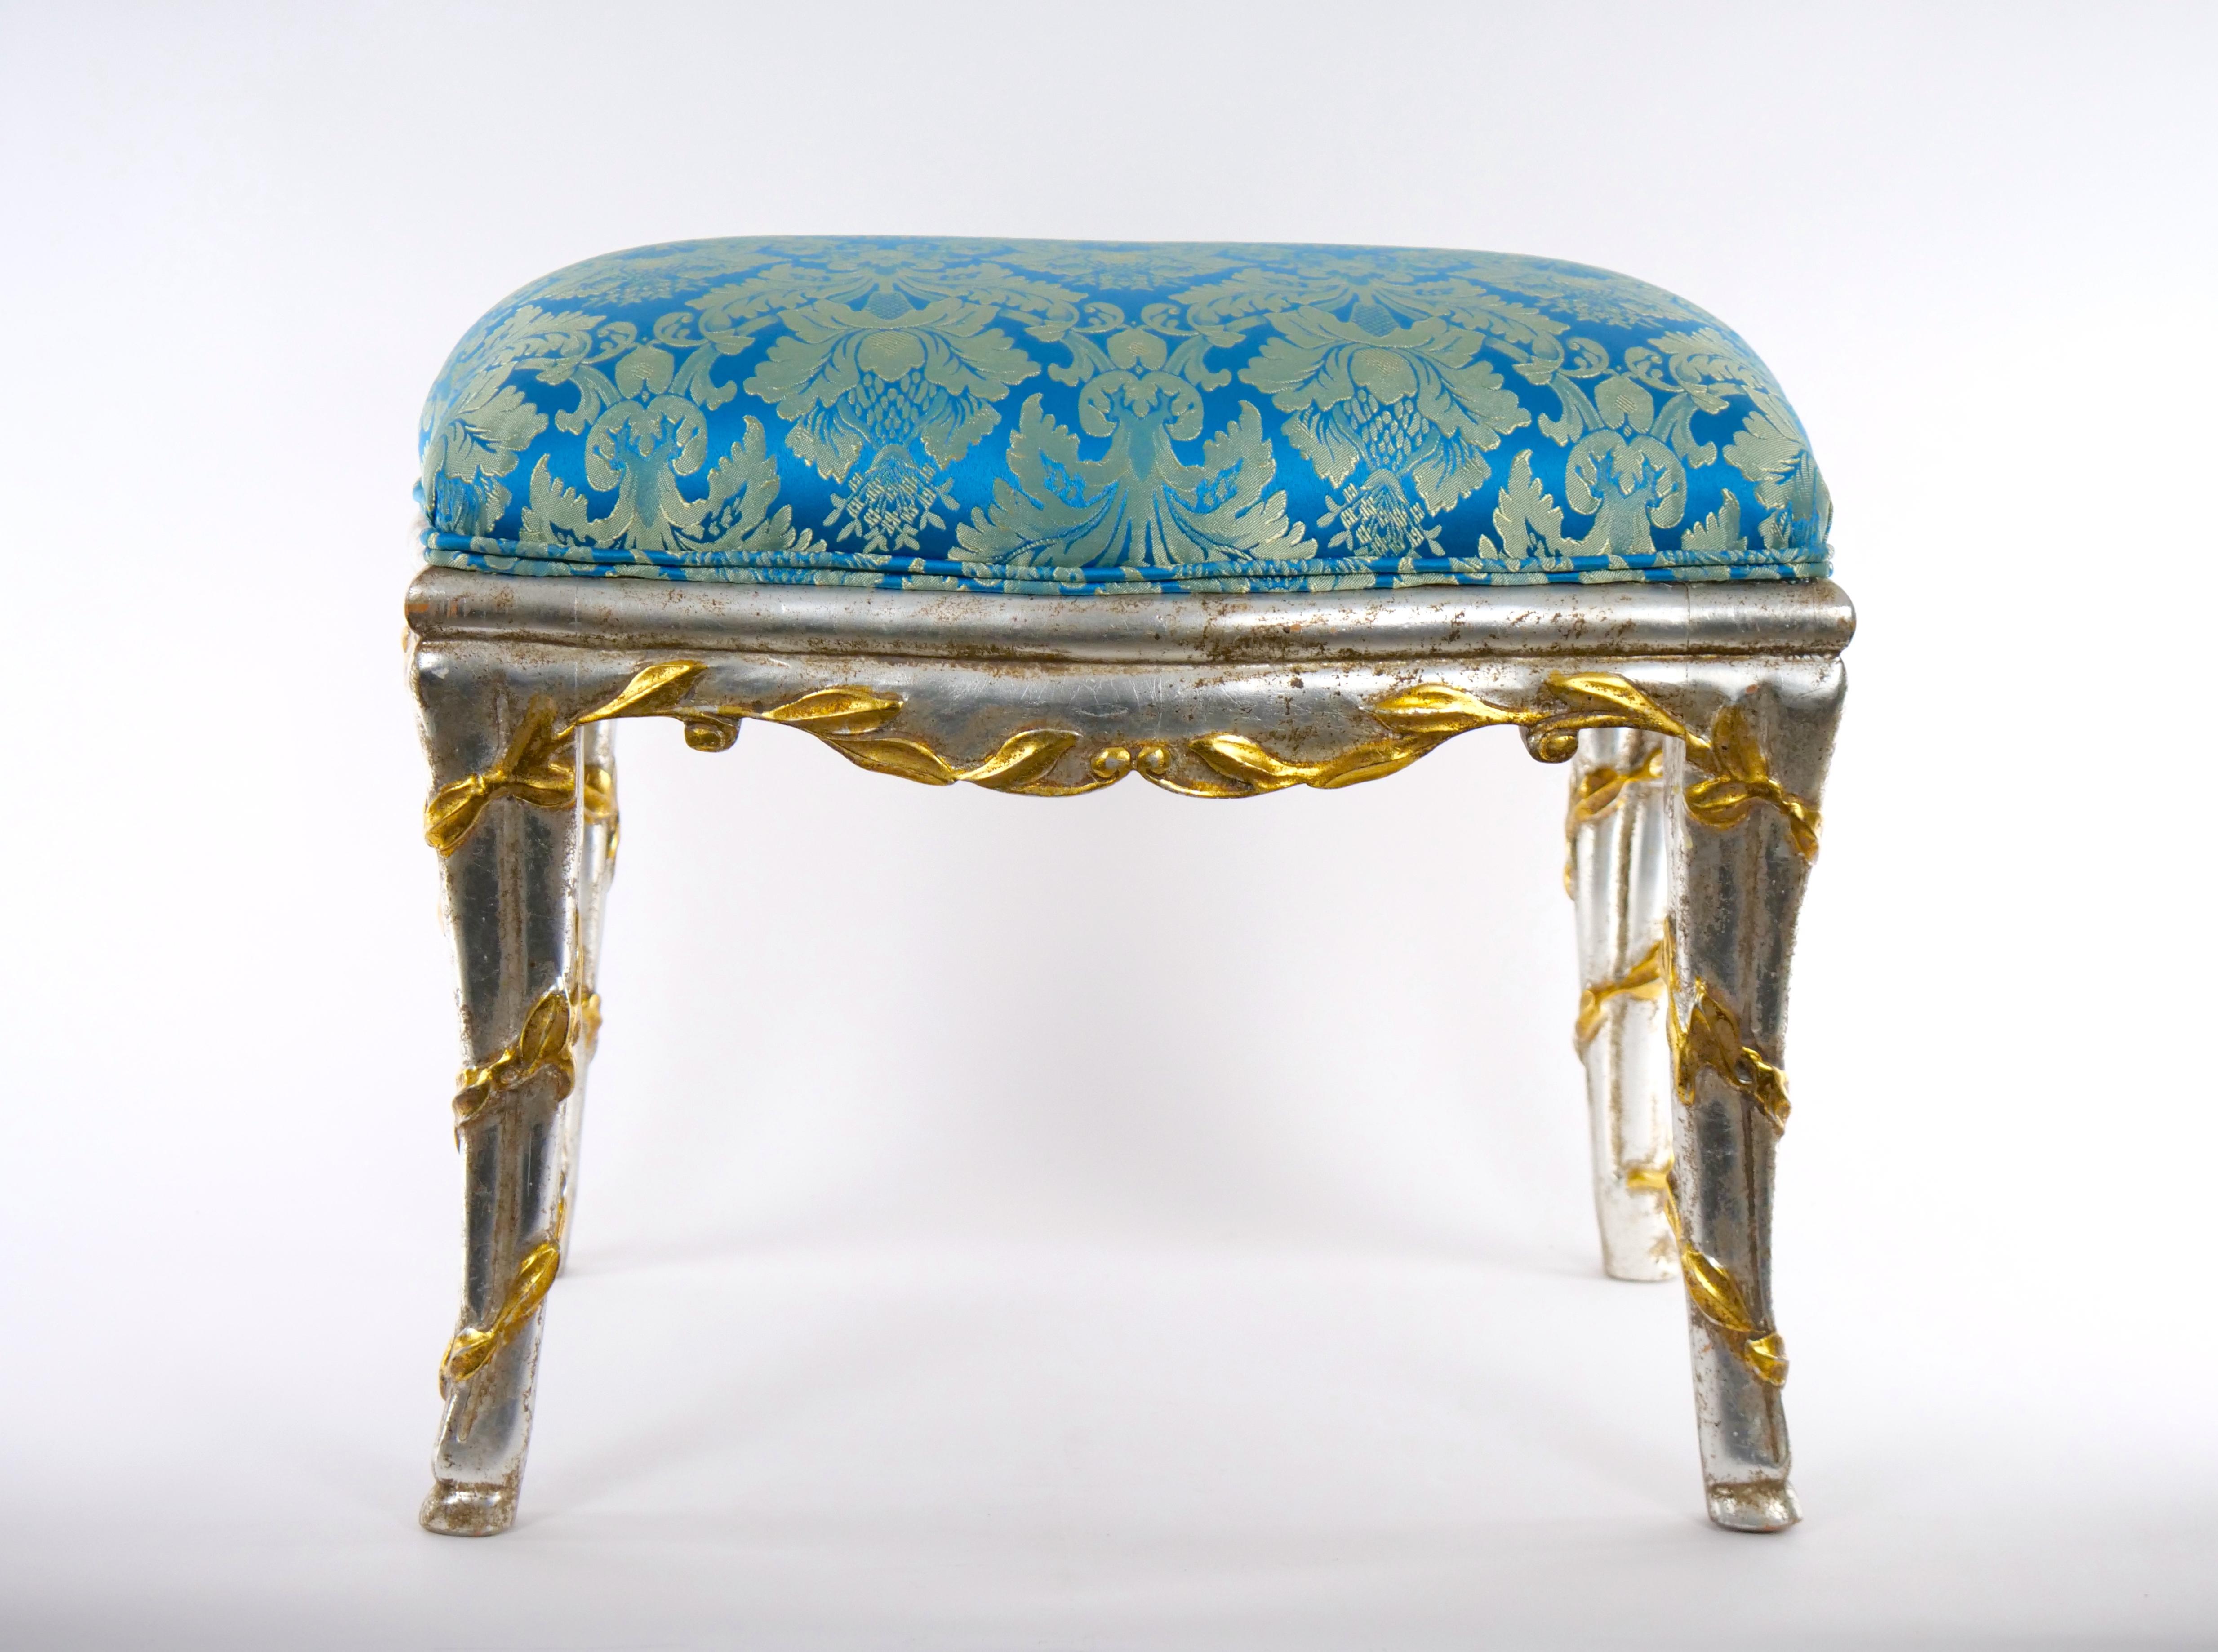 Mid-20th century Italian Louis XVI style hand painted wooden frame and hand decorated foliate design small bench with silk damask blend upholstered seat from the midcentury. This bench features hand carved fluted details legs decorated with hand